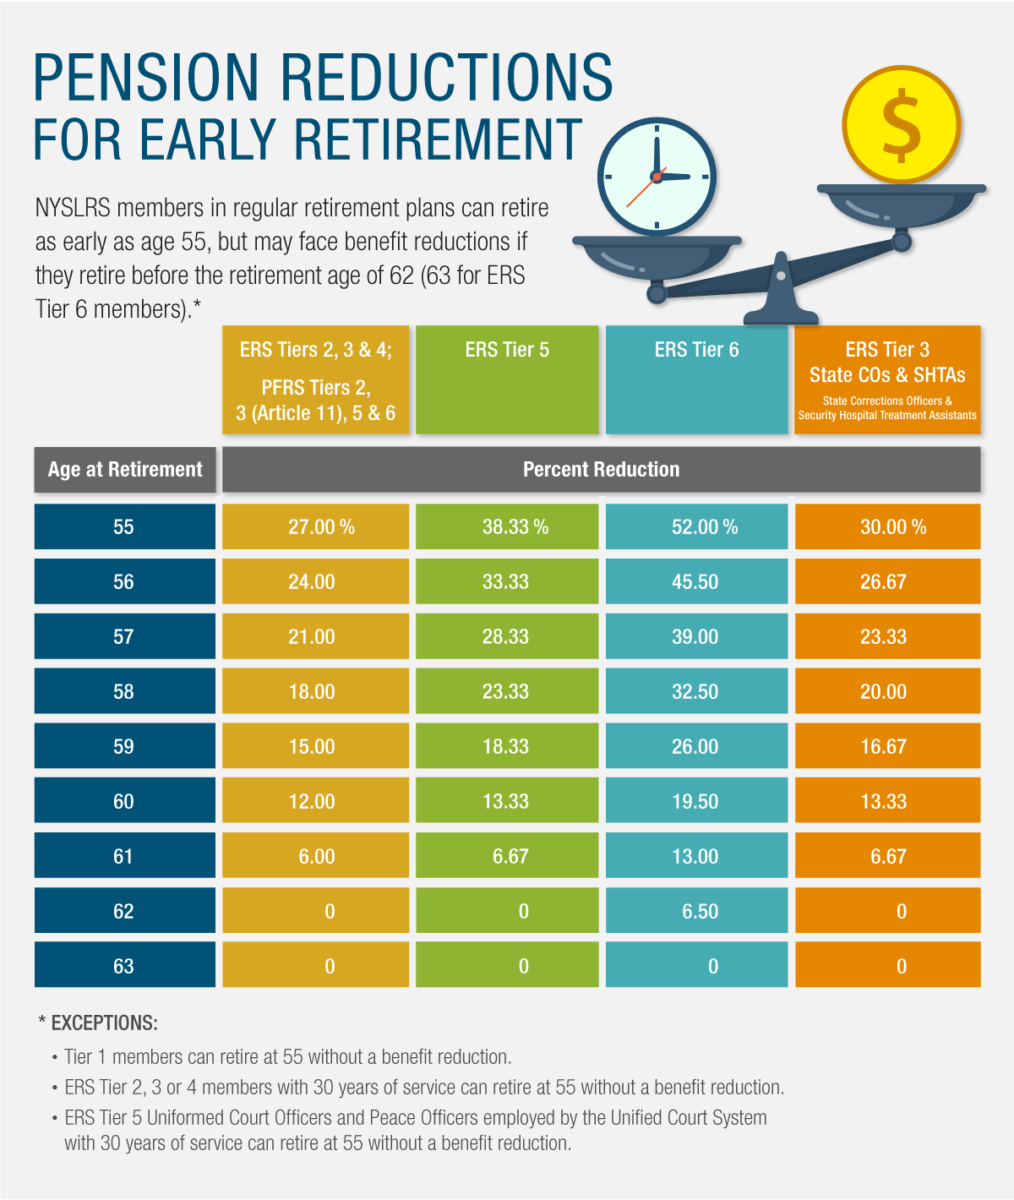 pension reductions based on retirement age